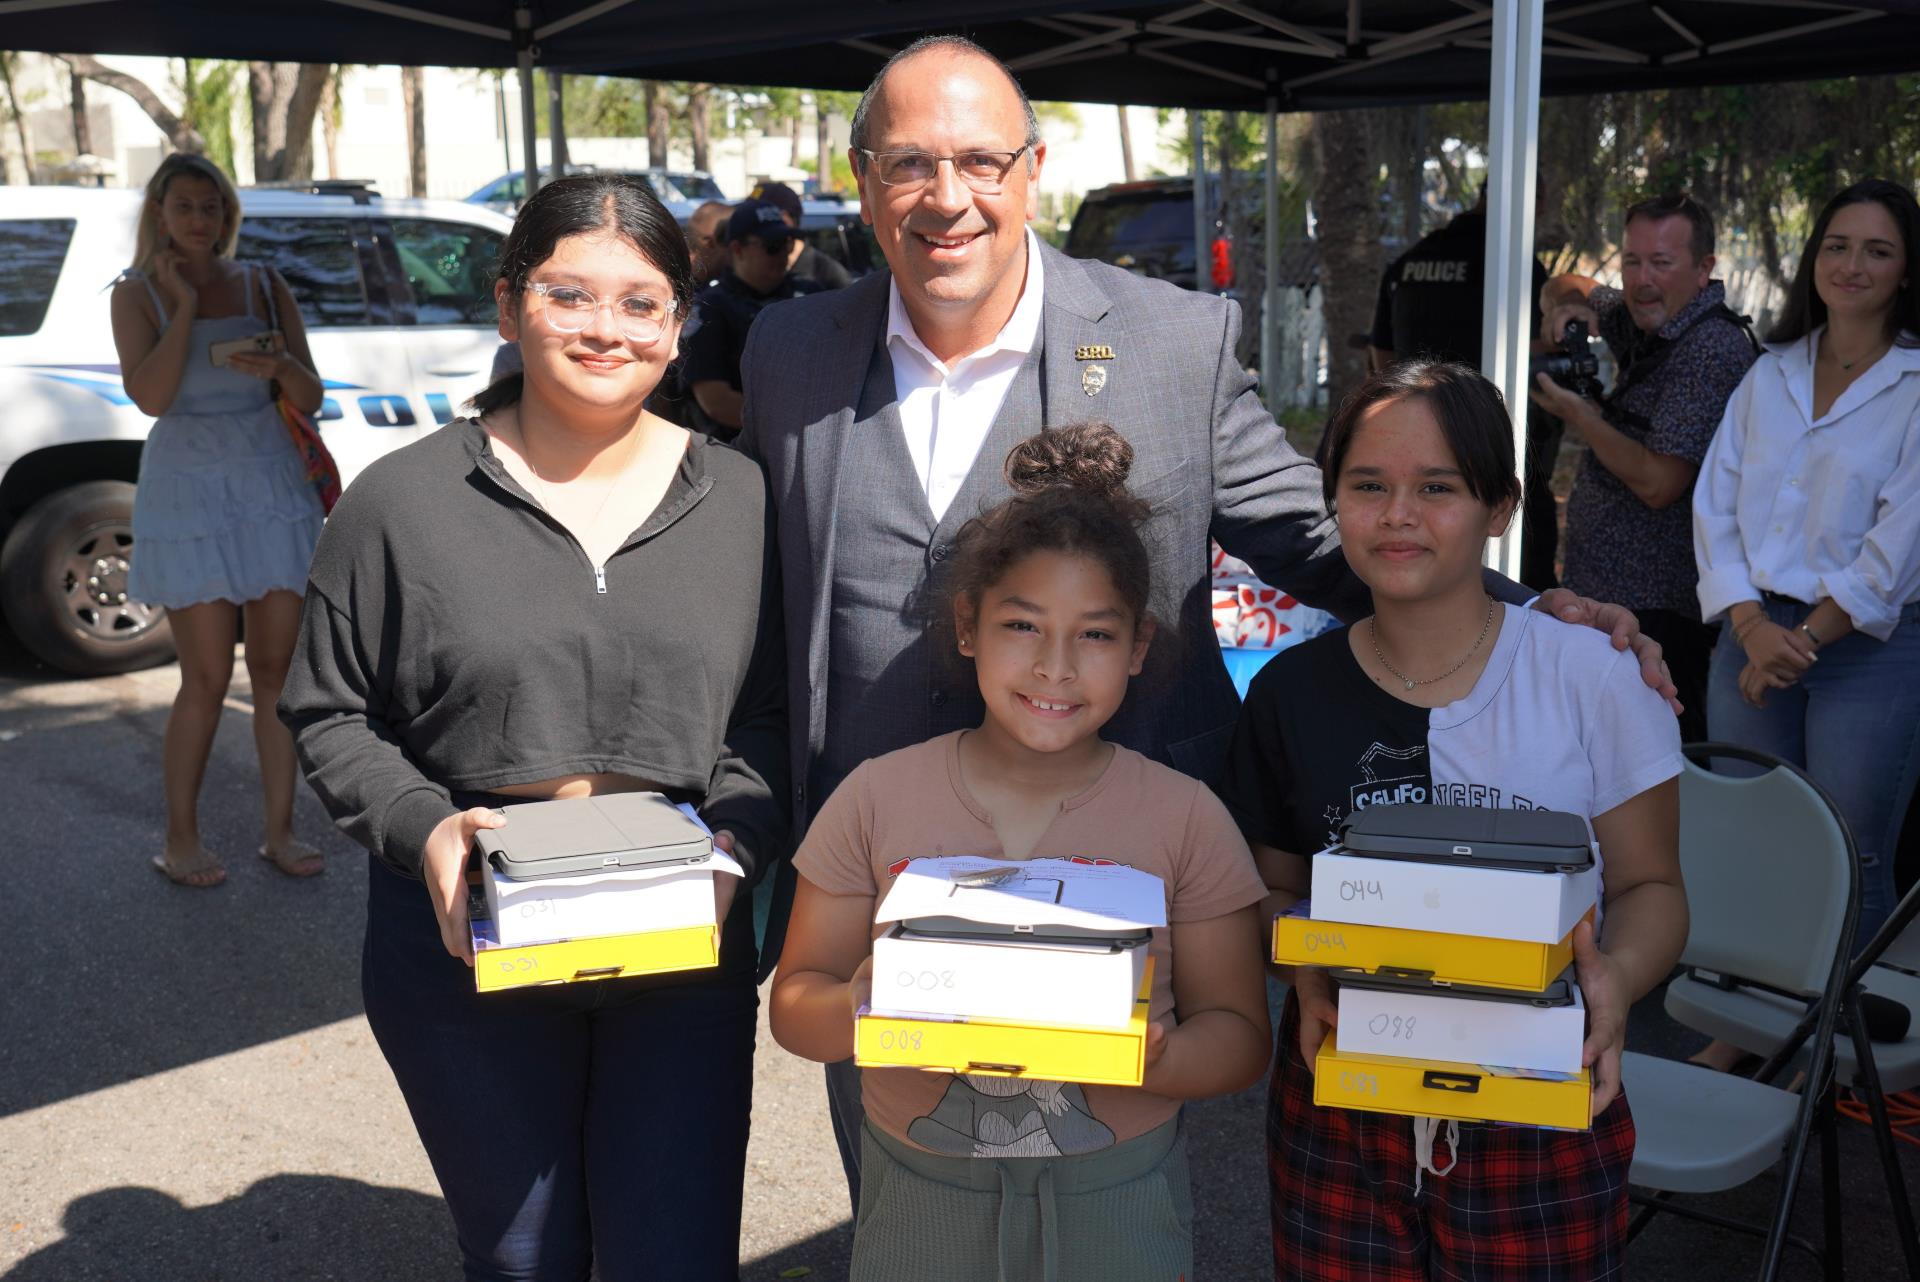 Chief Troche at iPad Giveaway